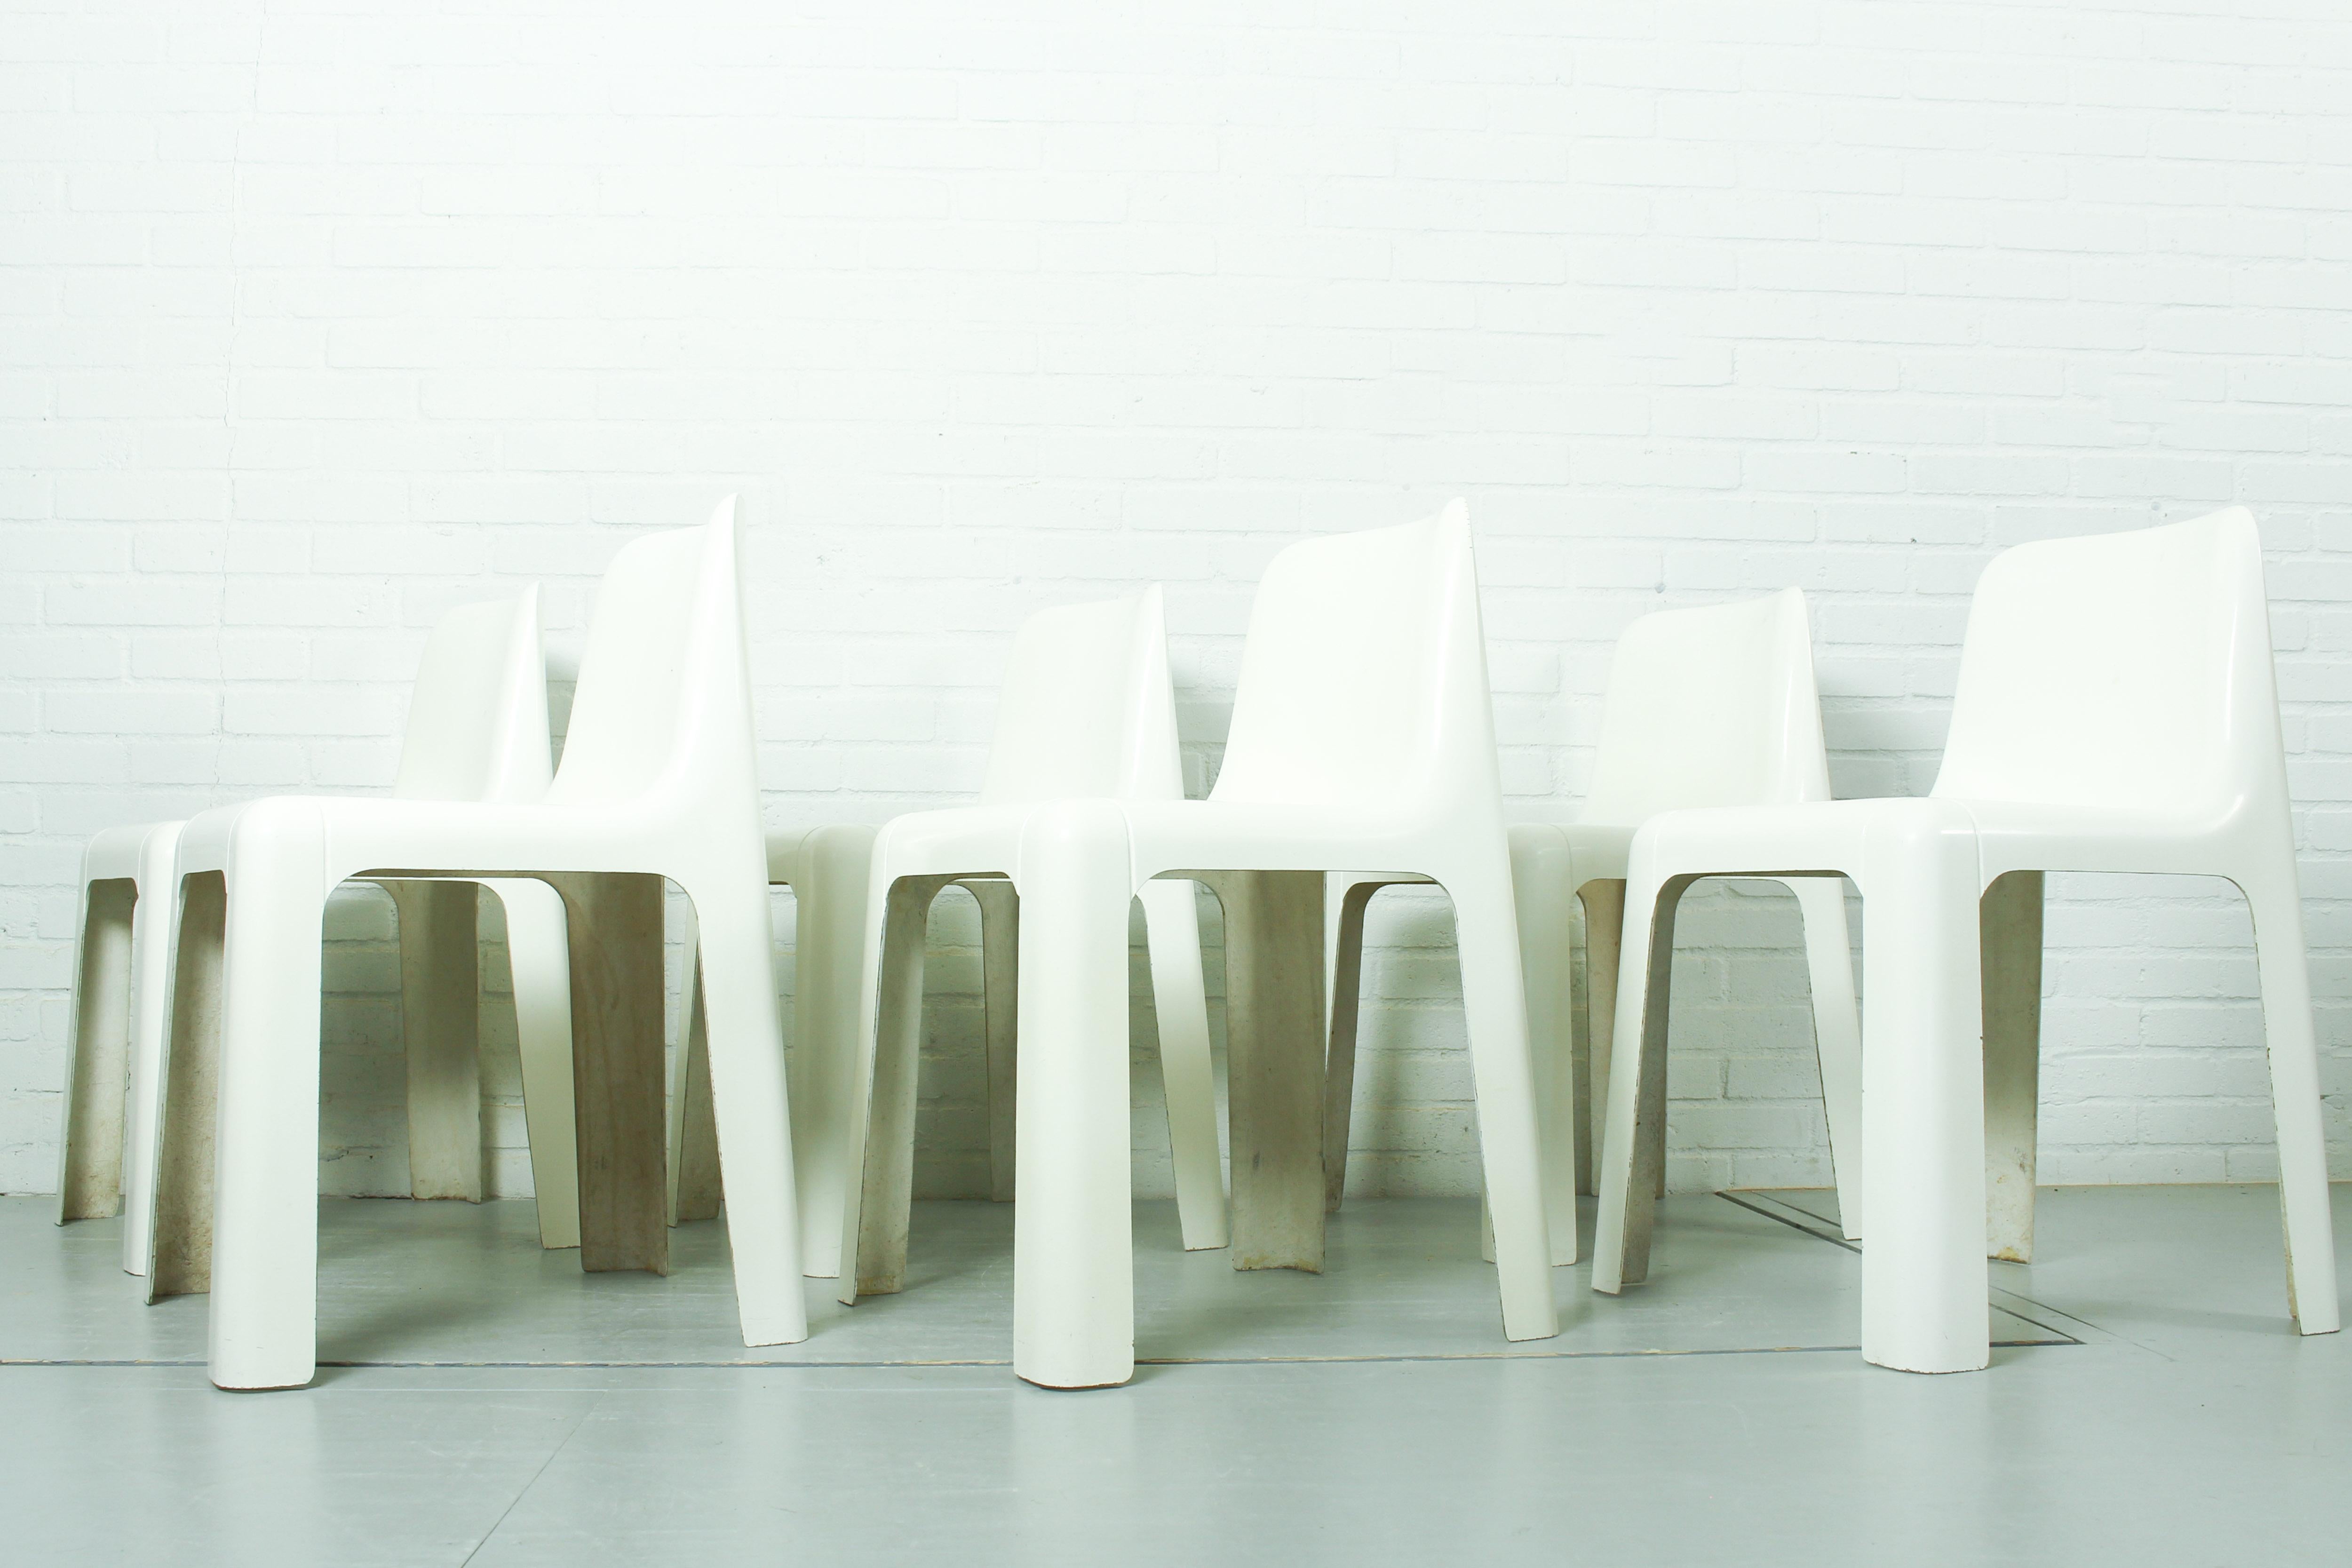 Set of 6 fiberglass chairs model OZOO 700 designed by Marc Berthier for Roche Bobois, France 1970s.  The chairs are suitable for indoor and outdoor use. The chairs are in original condition with some traces of use in accordance with age (see